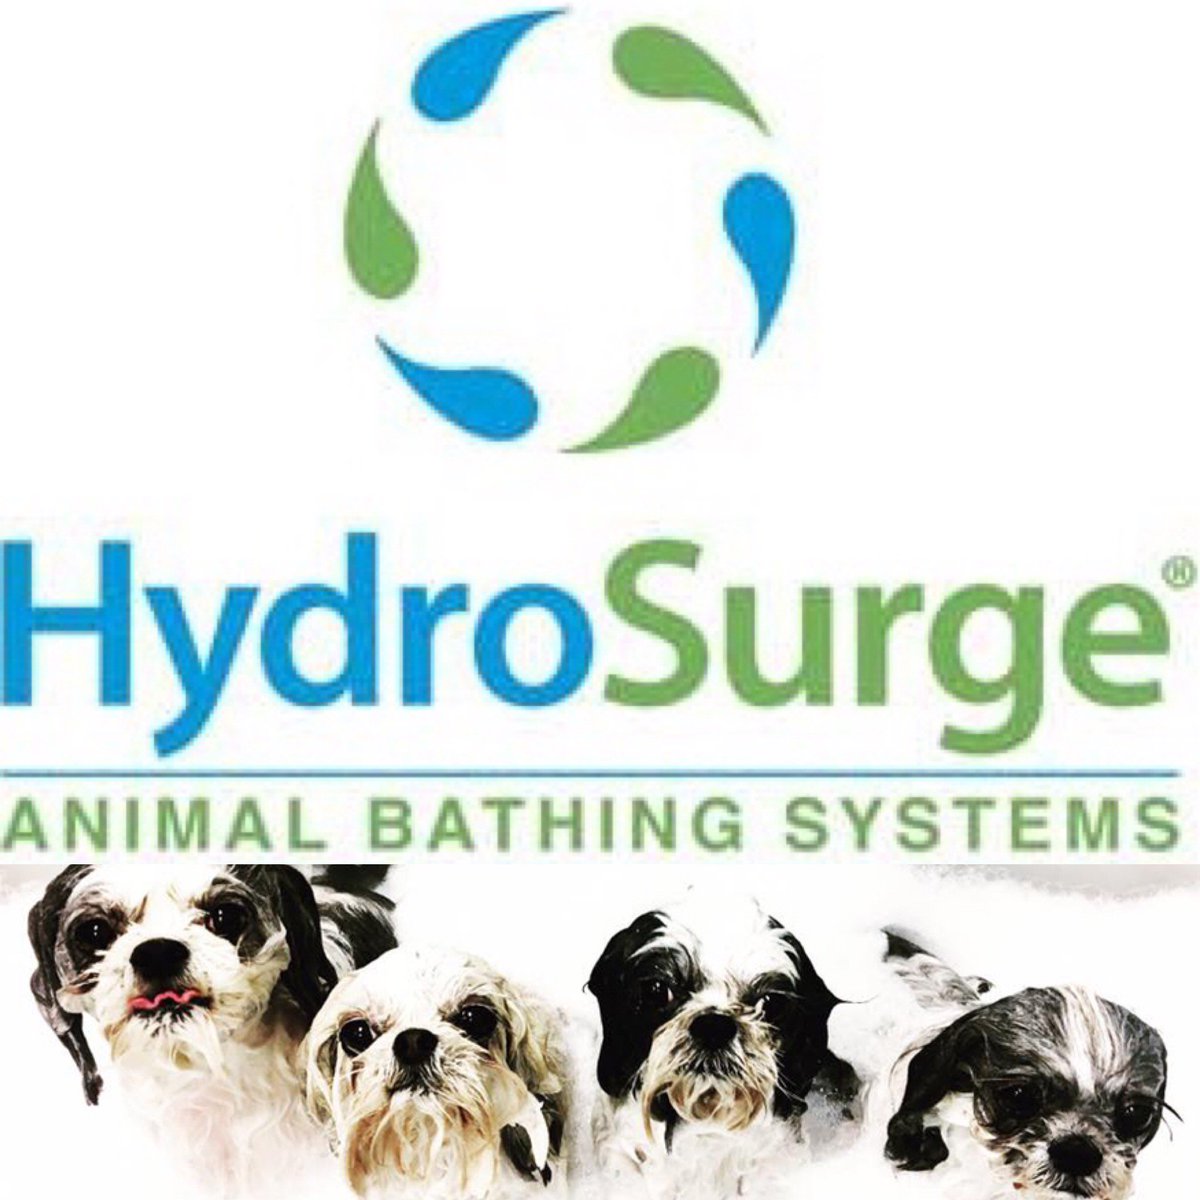 Woof Gang Bakery Henderson is excited to announce the HyrdoSurge Bathing System!  Now offered with all grooming service packages! Because your pets deserve the very best in bathing care. #hydrosurge #bestbathings #wgbhenderson #woofgangbakeryhenderson #wgb #massage #cleanpets